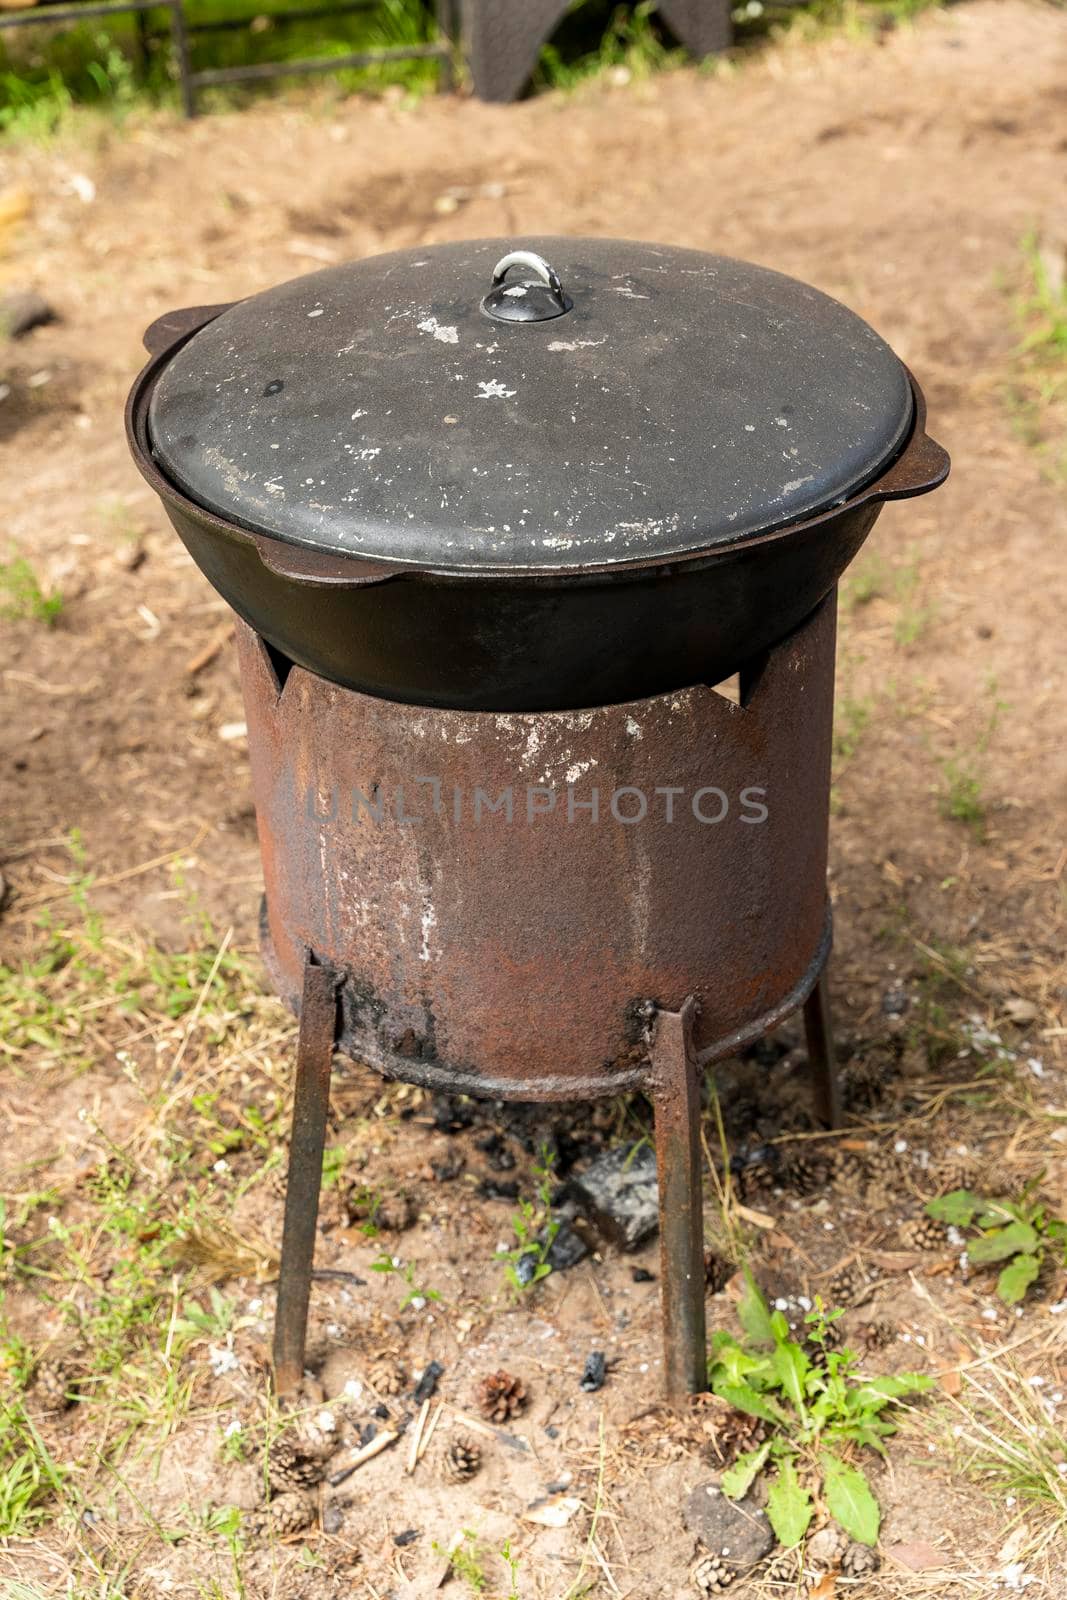 A cauldron for cooking outdoors. traditions of the east. cooking pilaf by audiznam2609